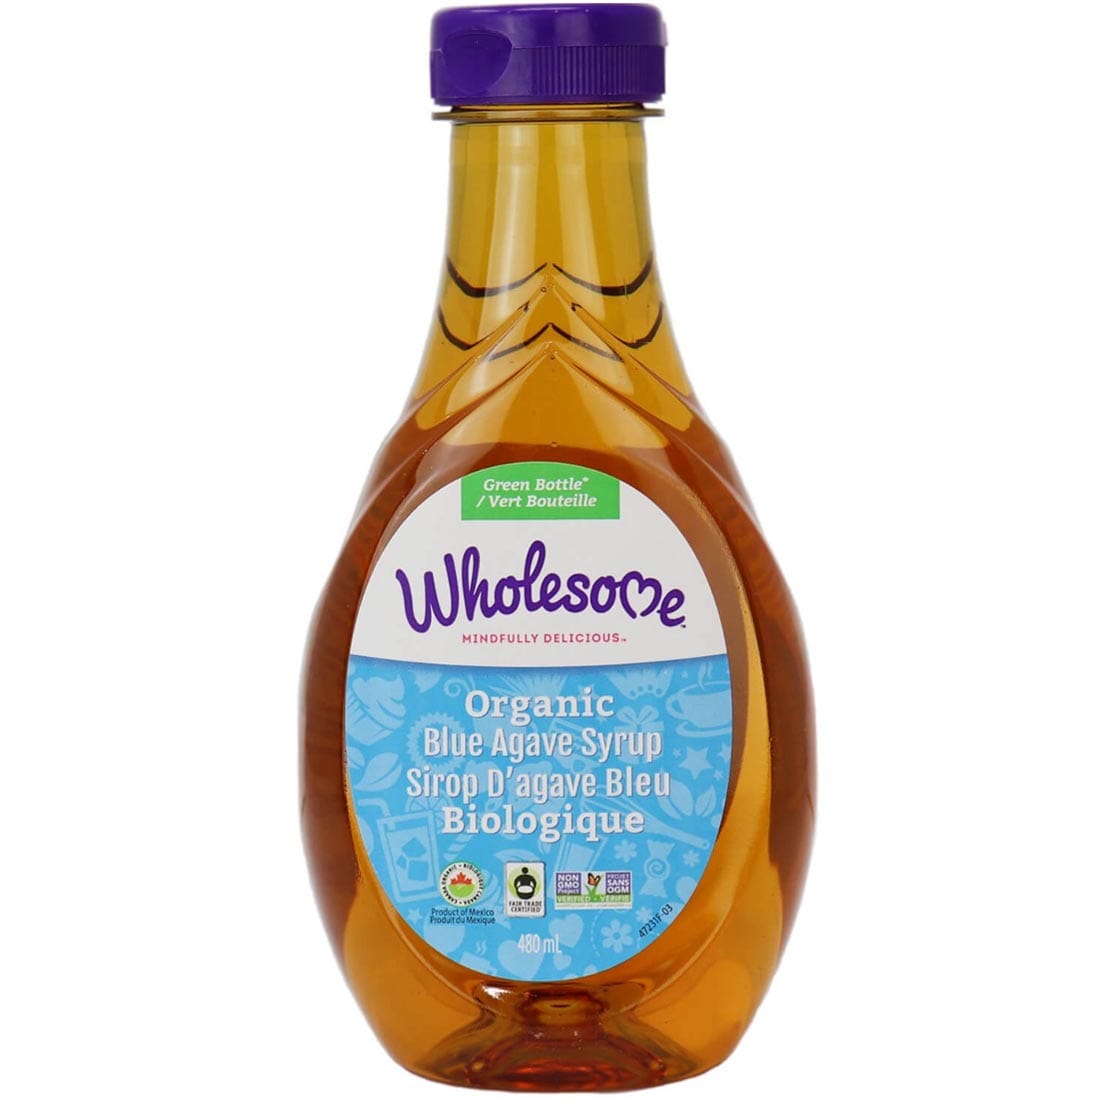 Wholesome Sweeteners Organic Blue Agave Syrup, Clearance 30% Off, Final Sale